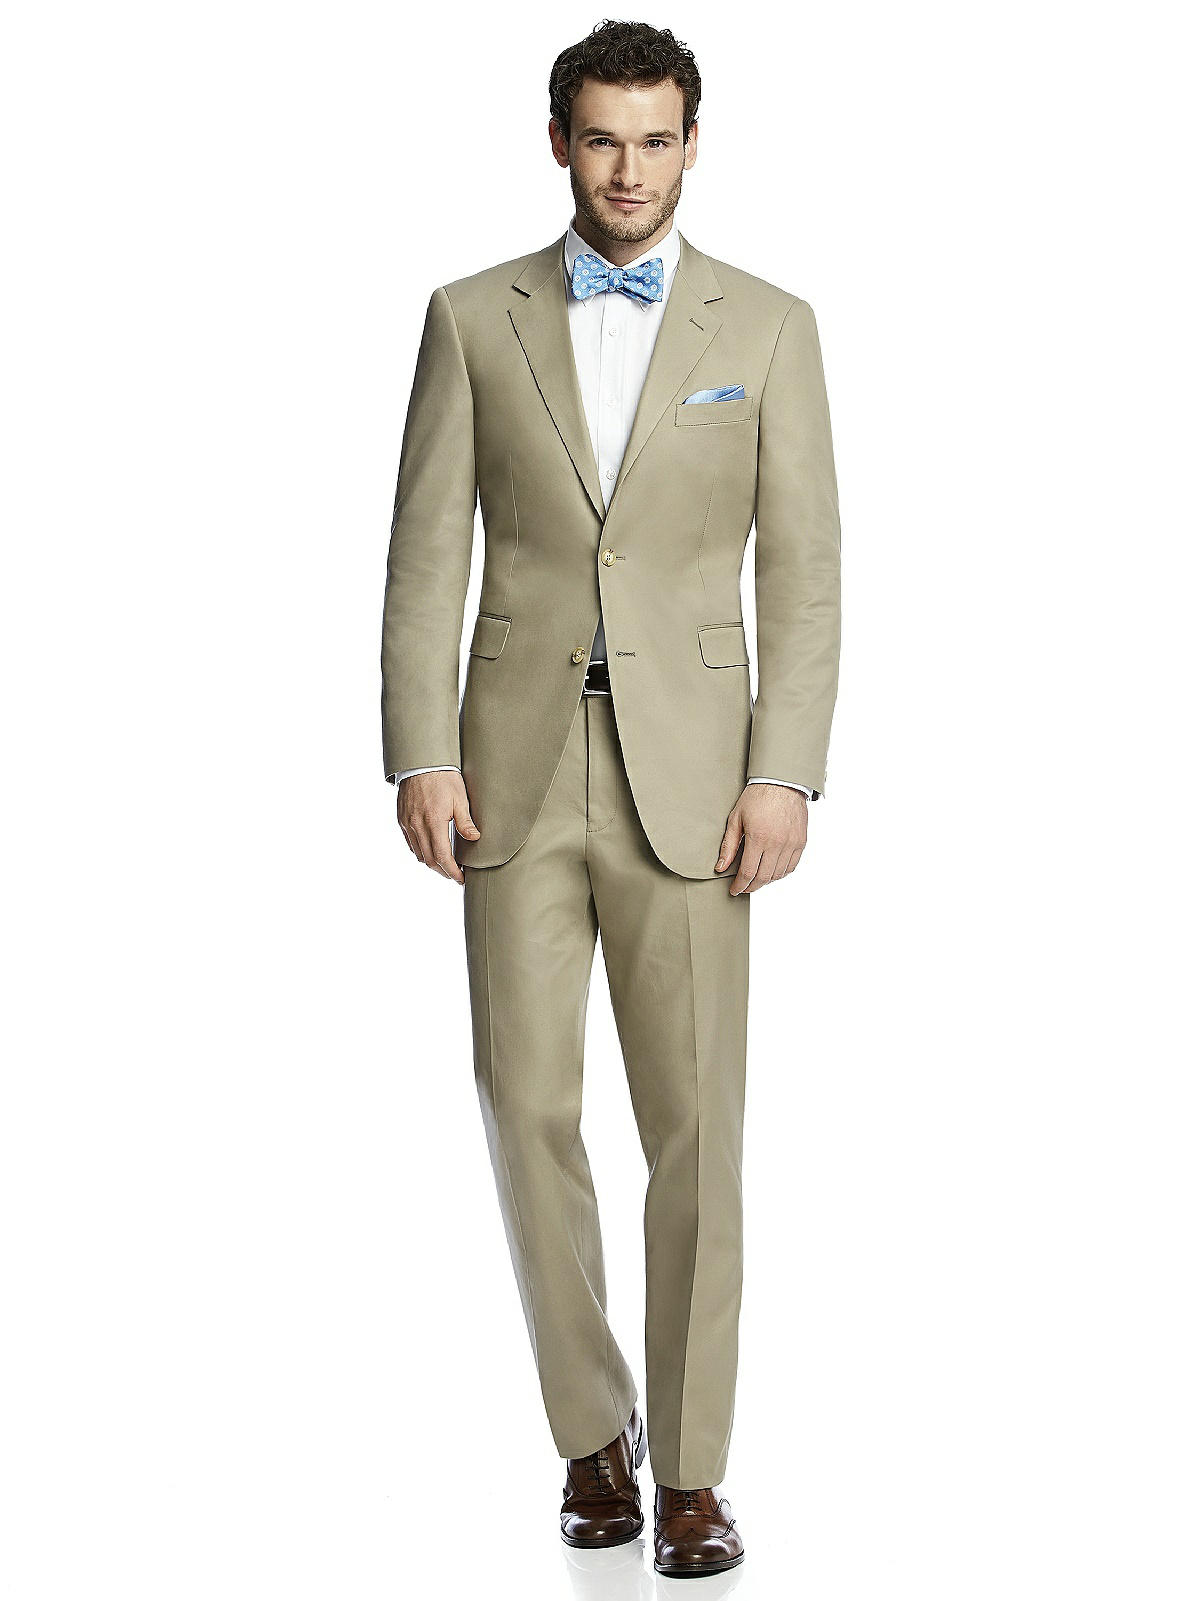 Classic Summer Suit Jacket by After Six: The Dessy Group